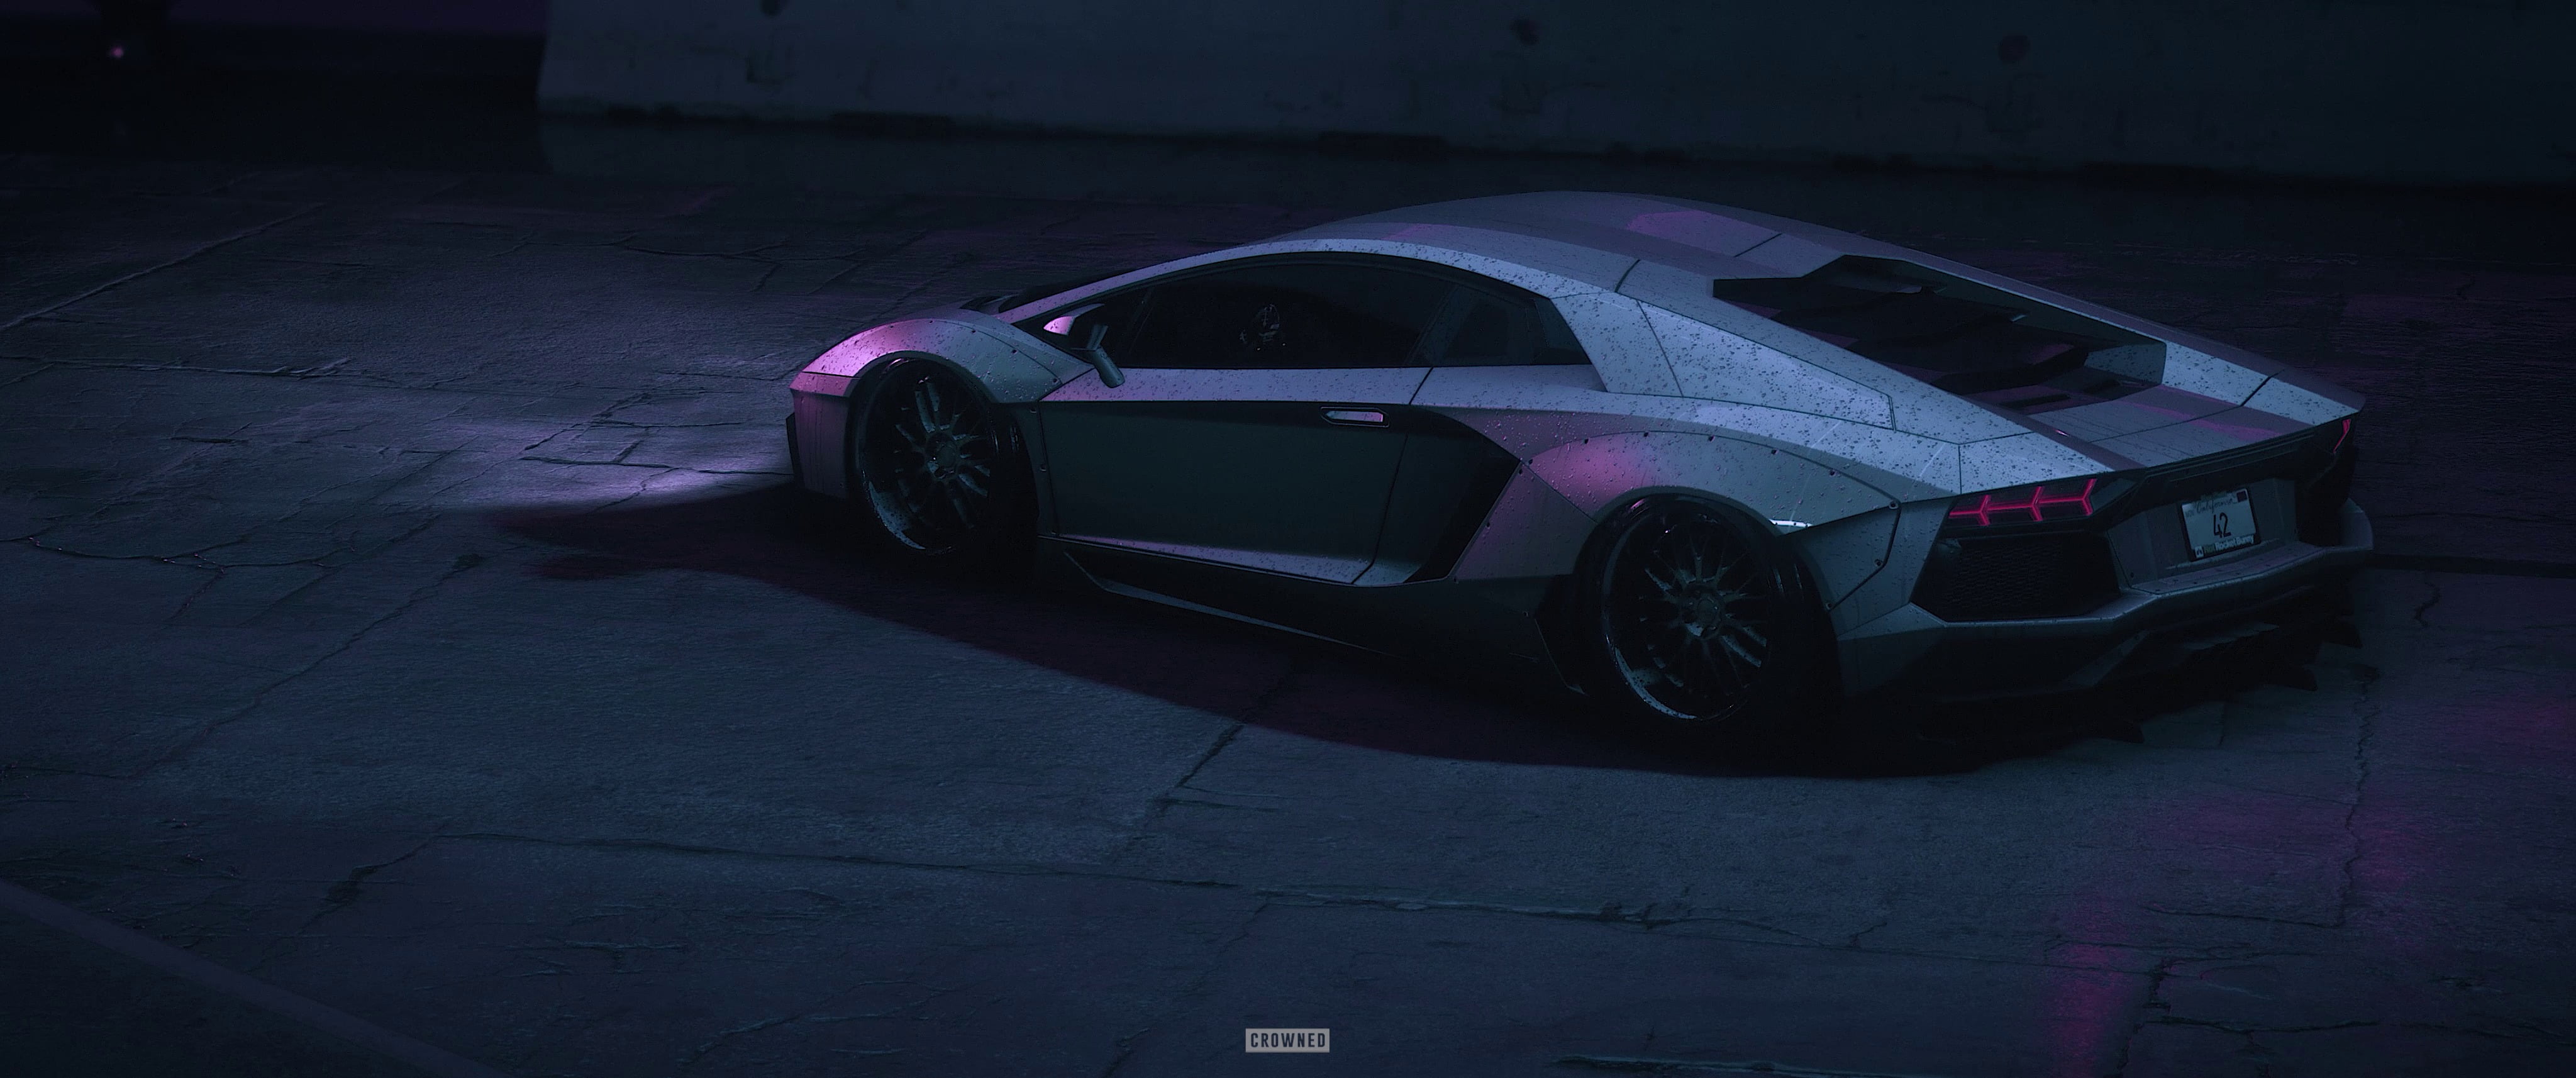 gray coupe digital wallpaper, CROWNED, Need for Speed, Lamborghini Aventador